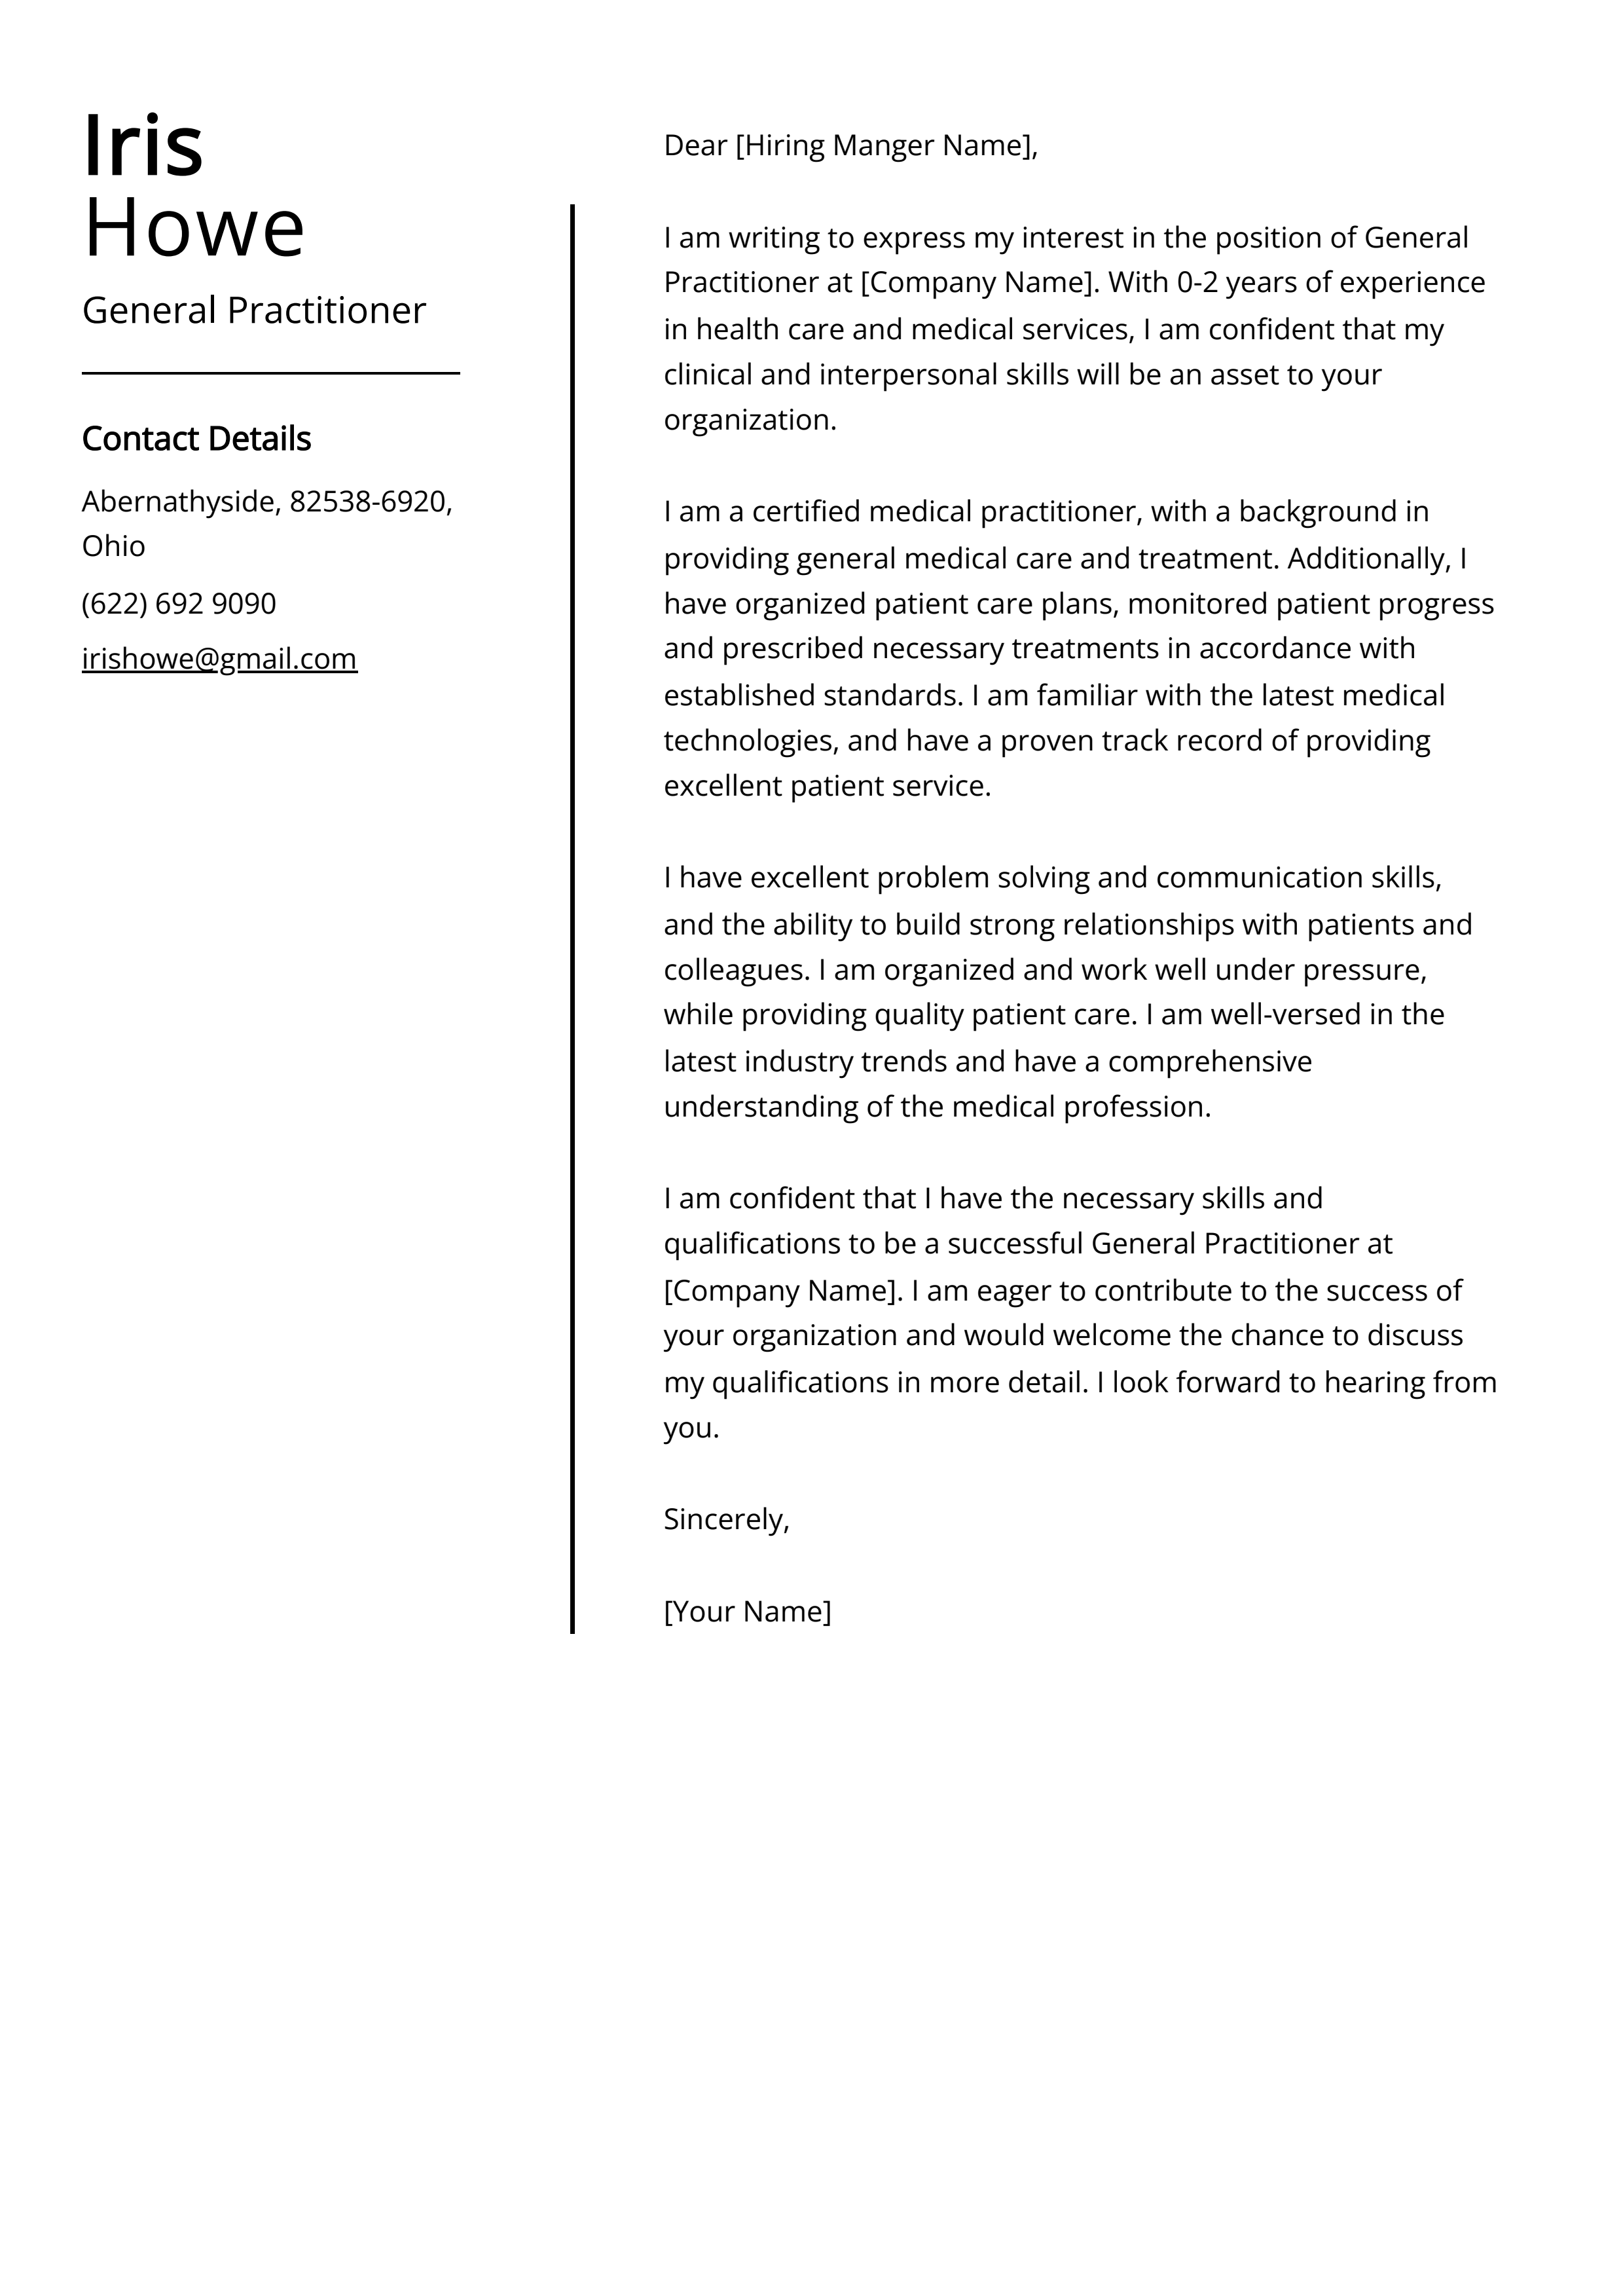 General Practitioner Cover Letter Example